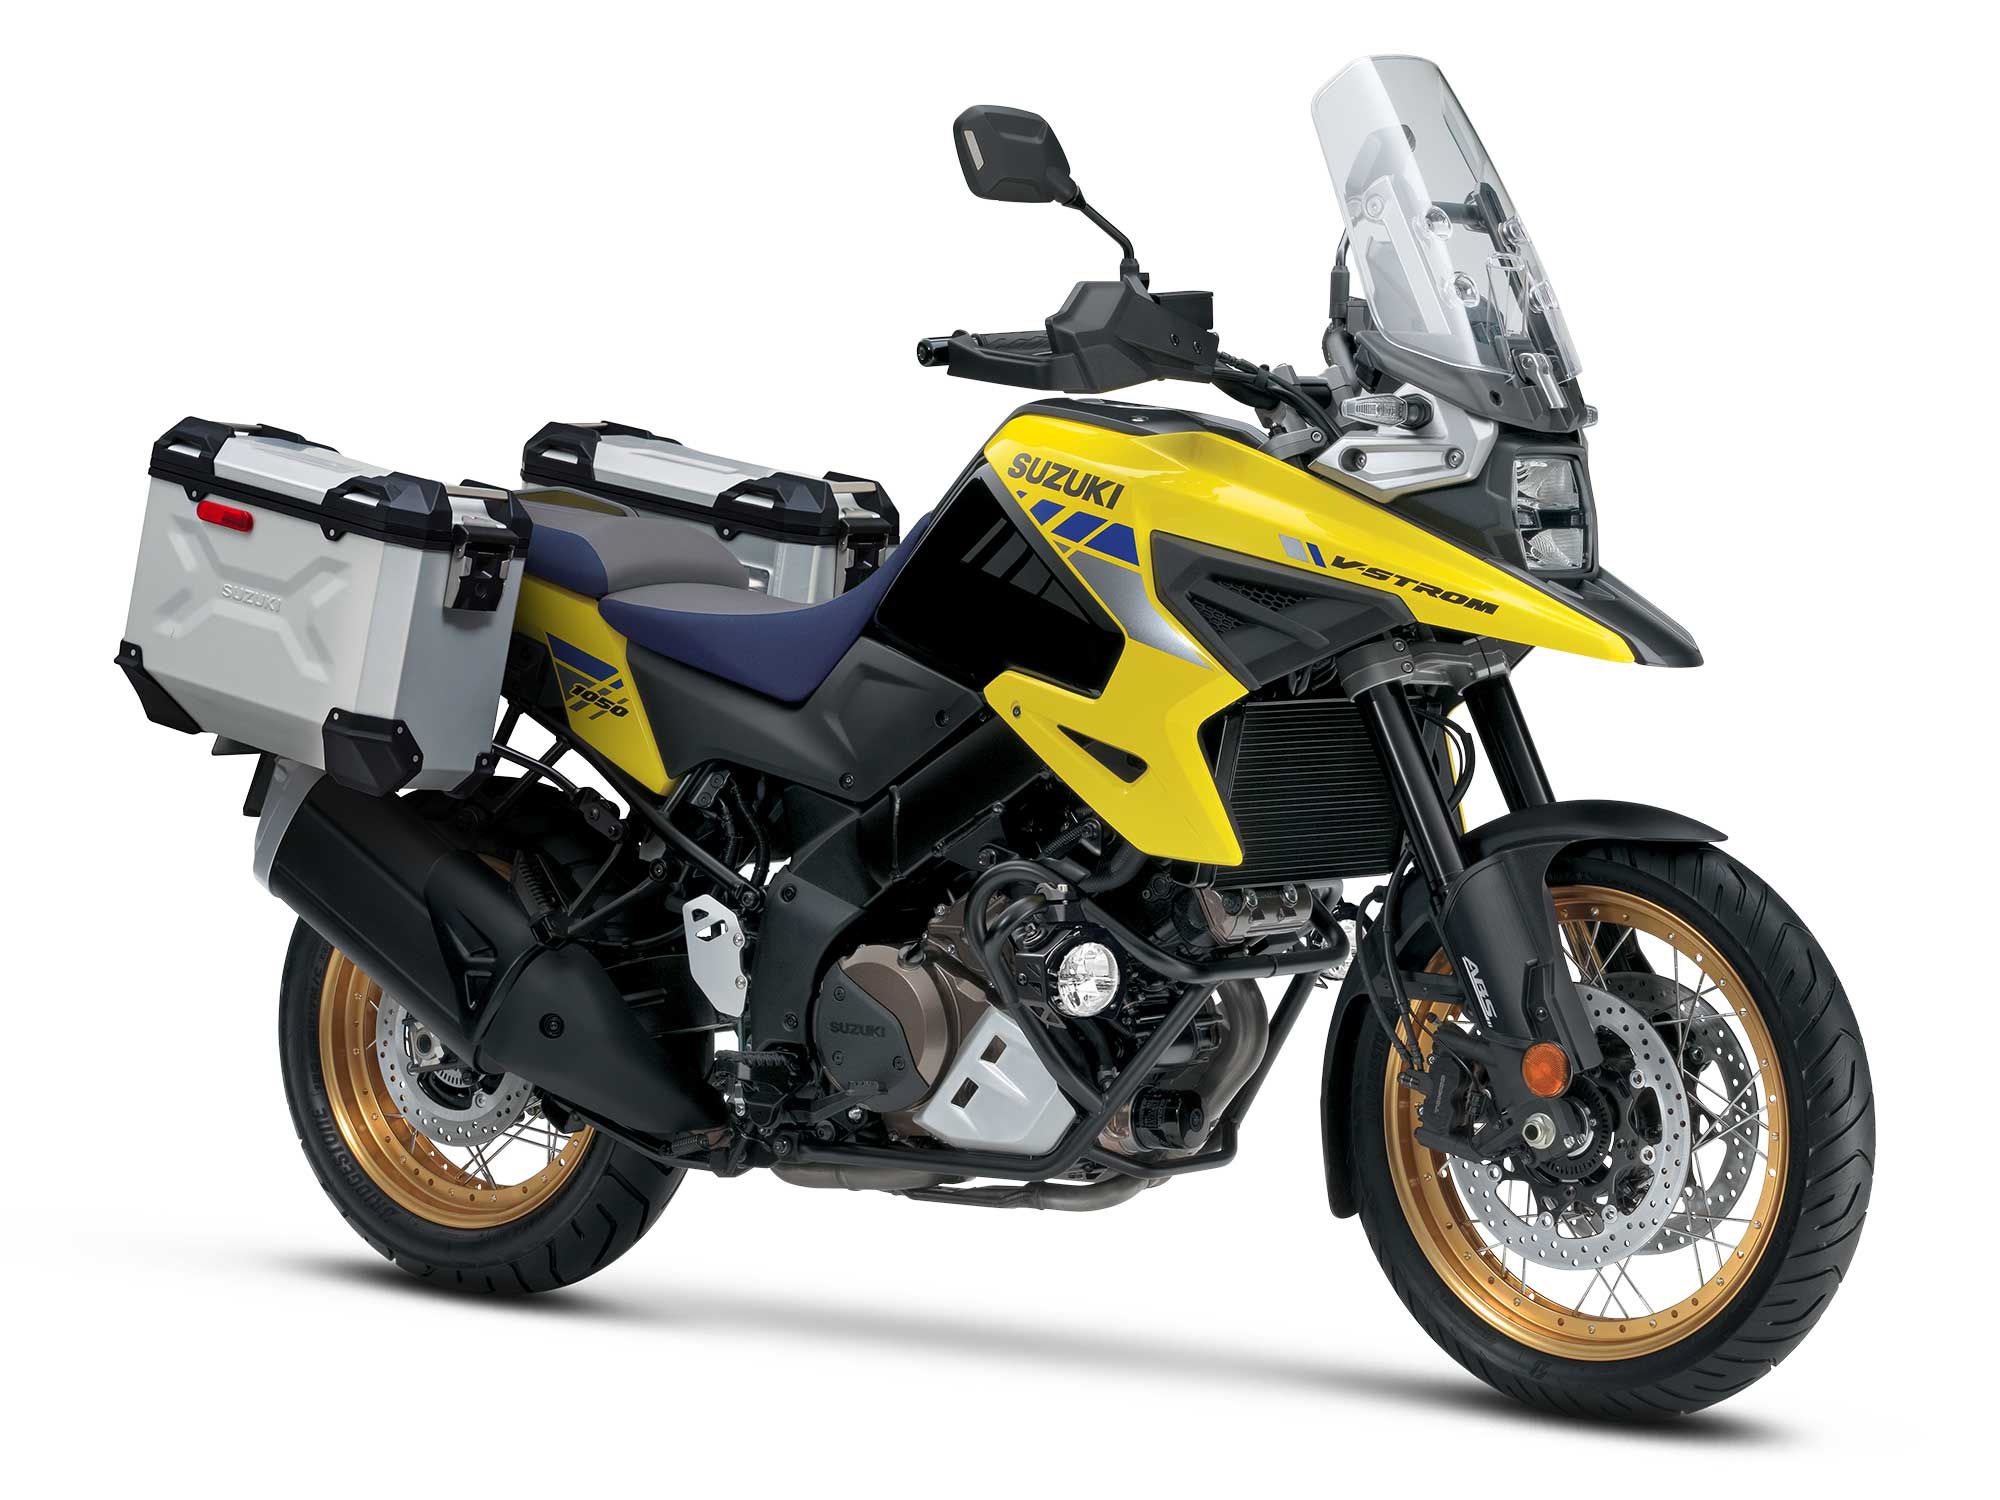 The 2022 Suzuki V-Strom 1050XT Adventure comes with panniers, heated grips, and fog lamps and will start at $17,049.